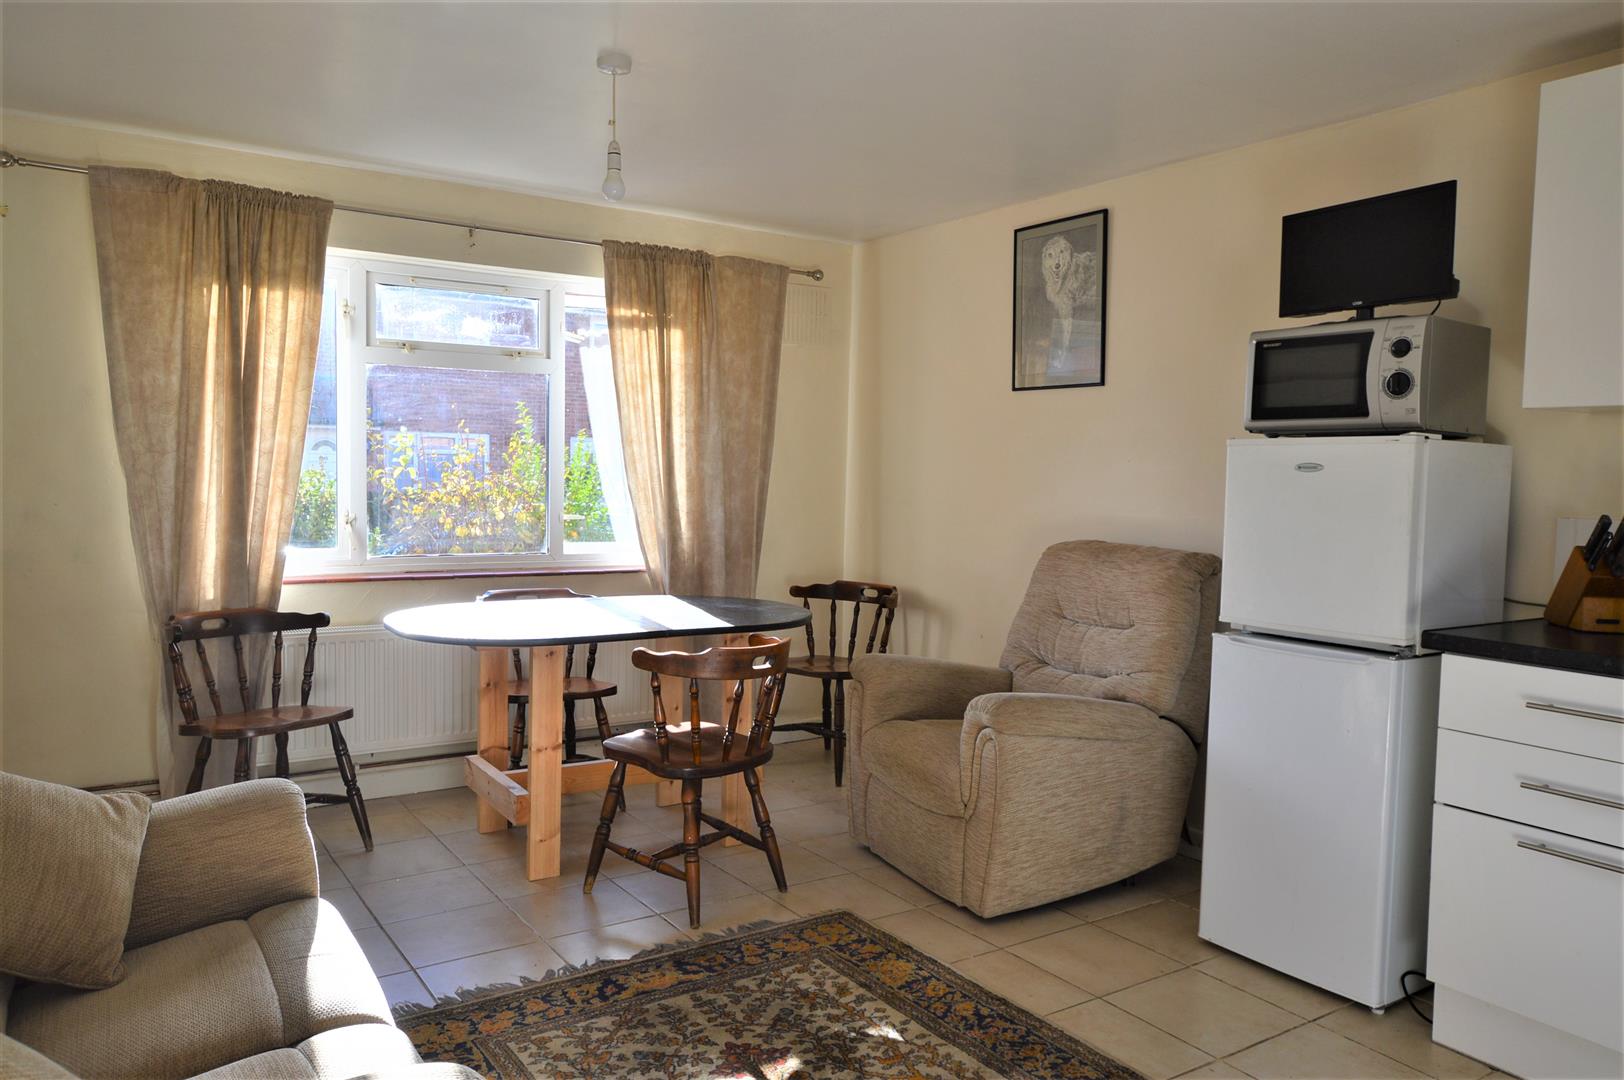 3 bed terraced for sale in Weobley  - Property Image 3